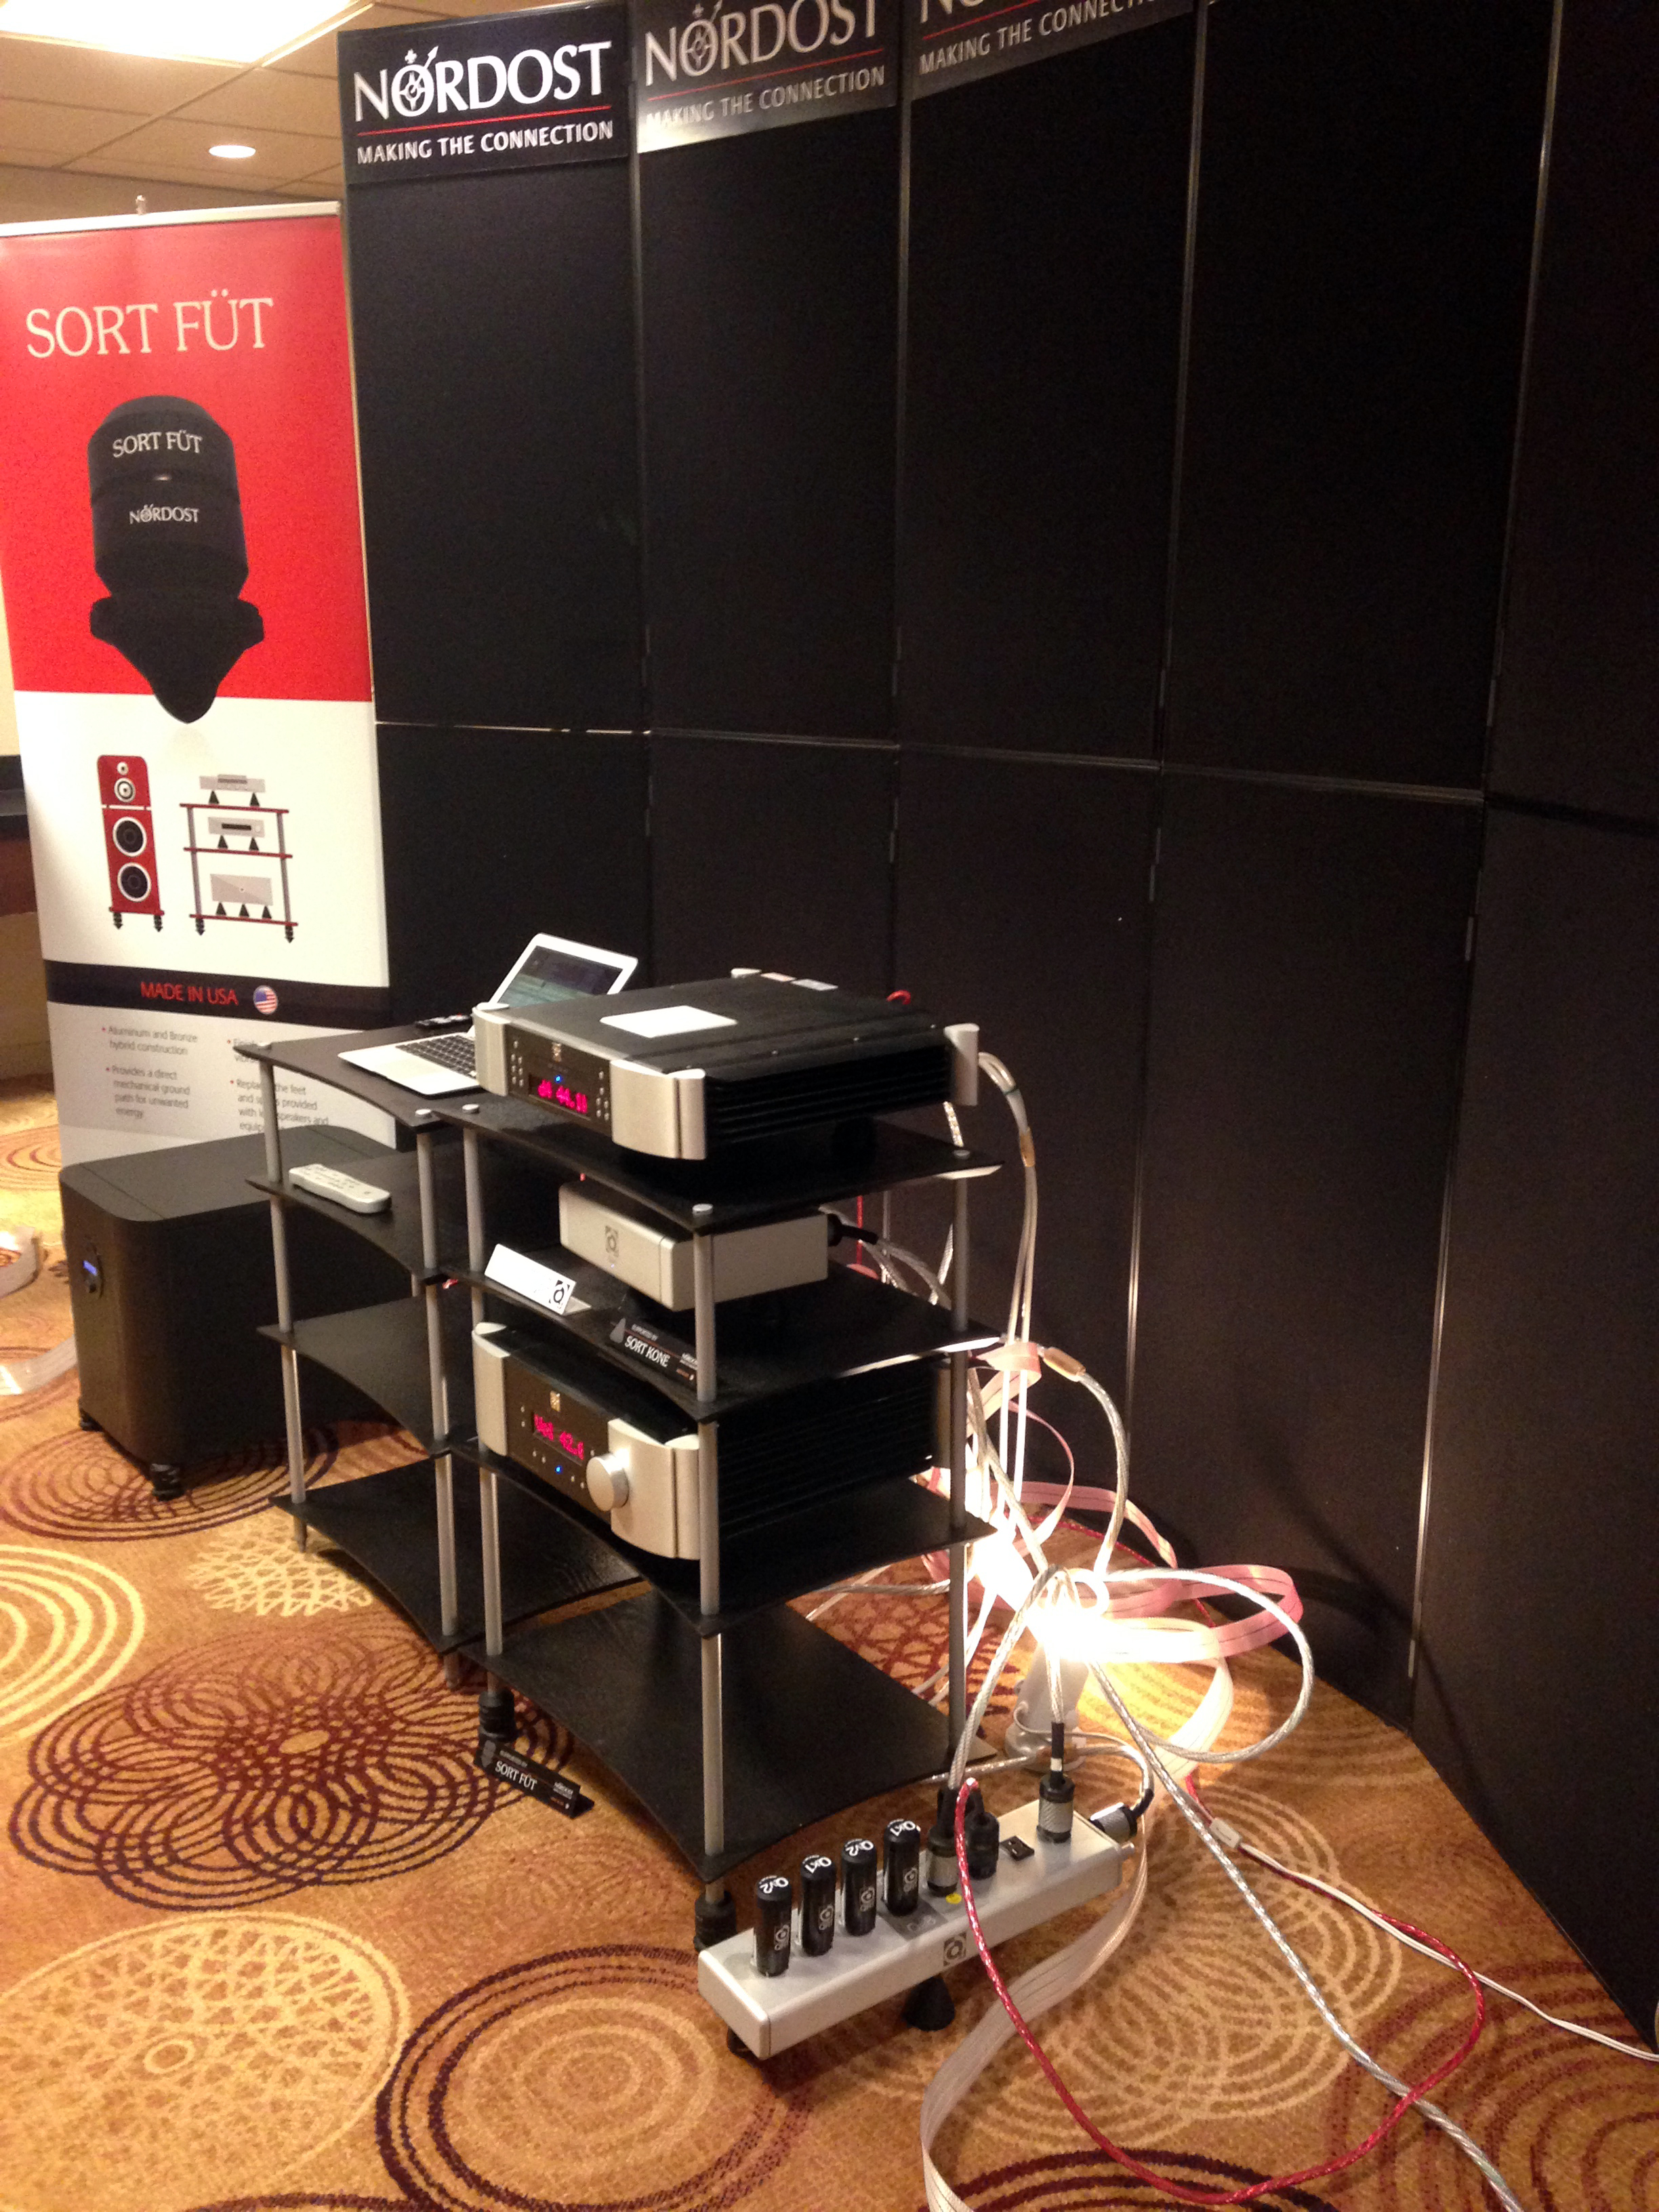 Our Demo room was equipped with two racks to do A-B demonstrations with the Sort Füt!